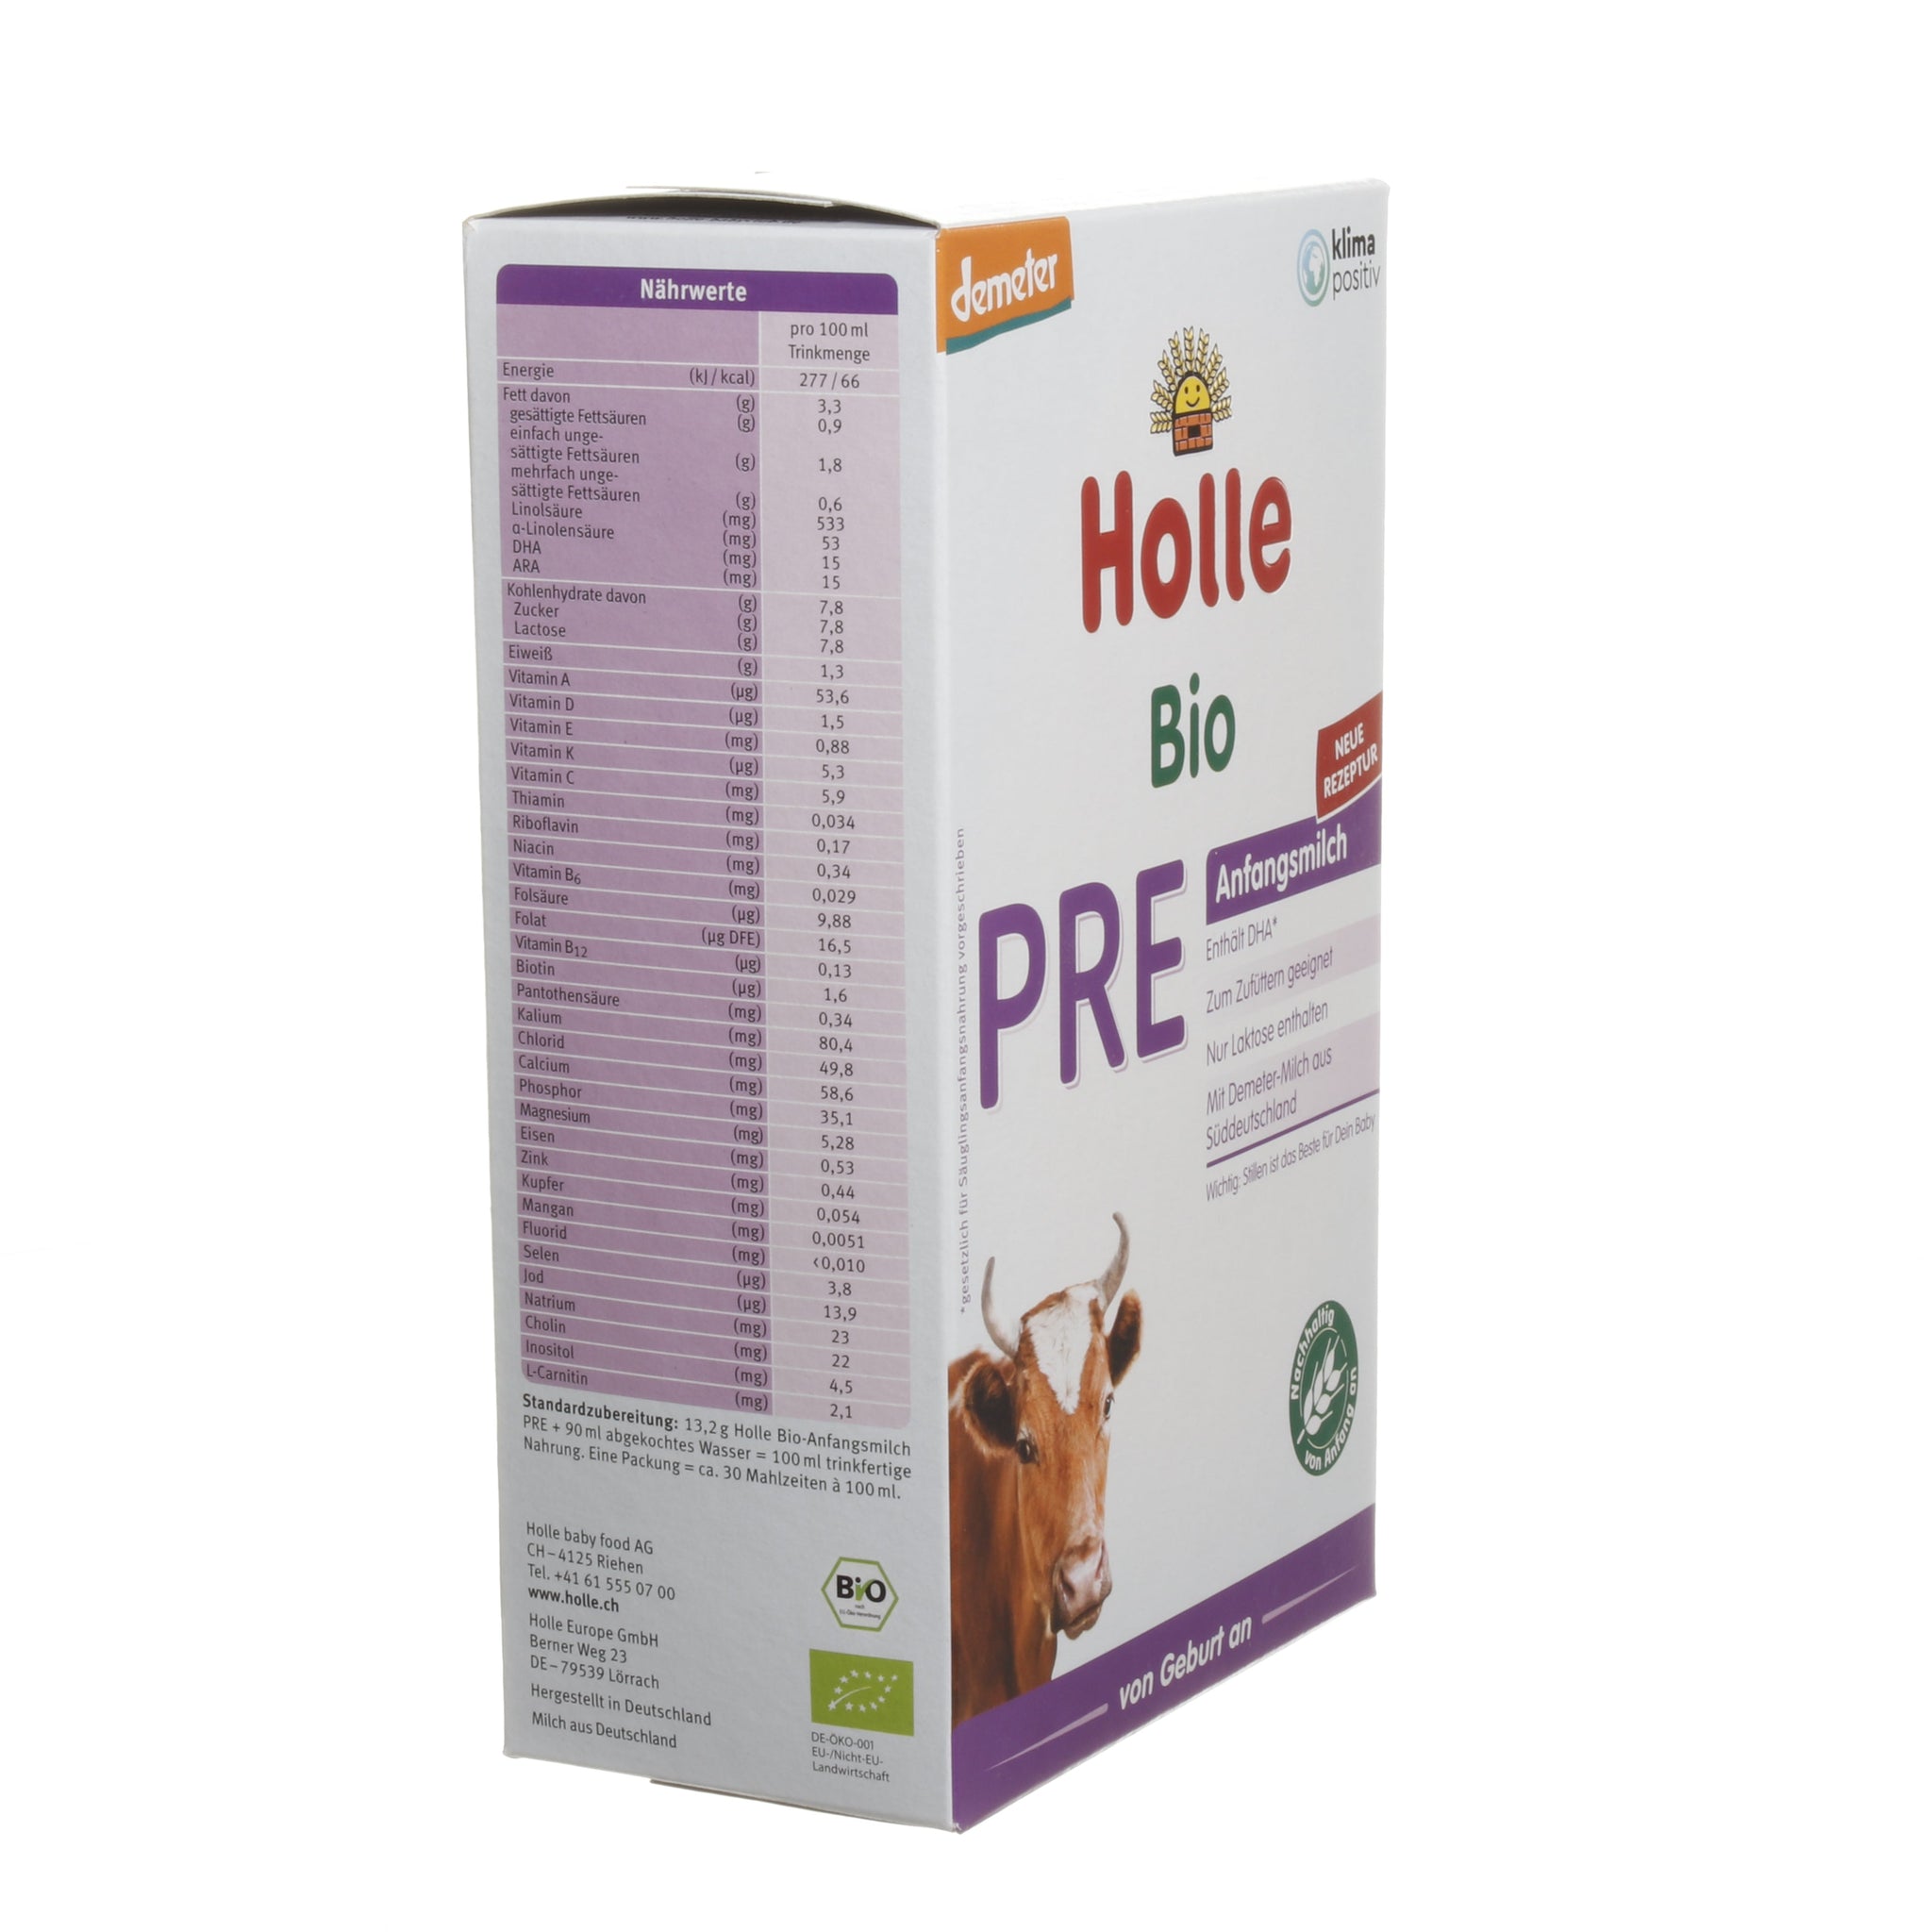 15 x Holle Organic Infant Cow Formula Pre, 400g - firstorganicbaby